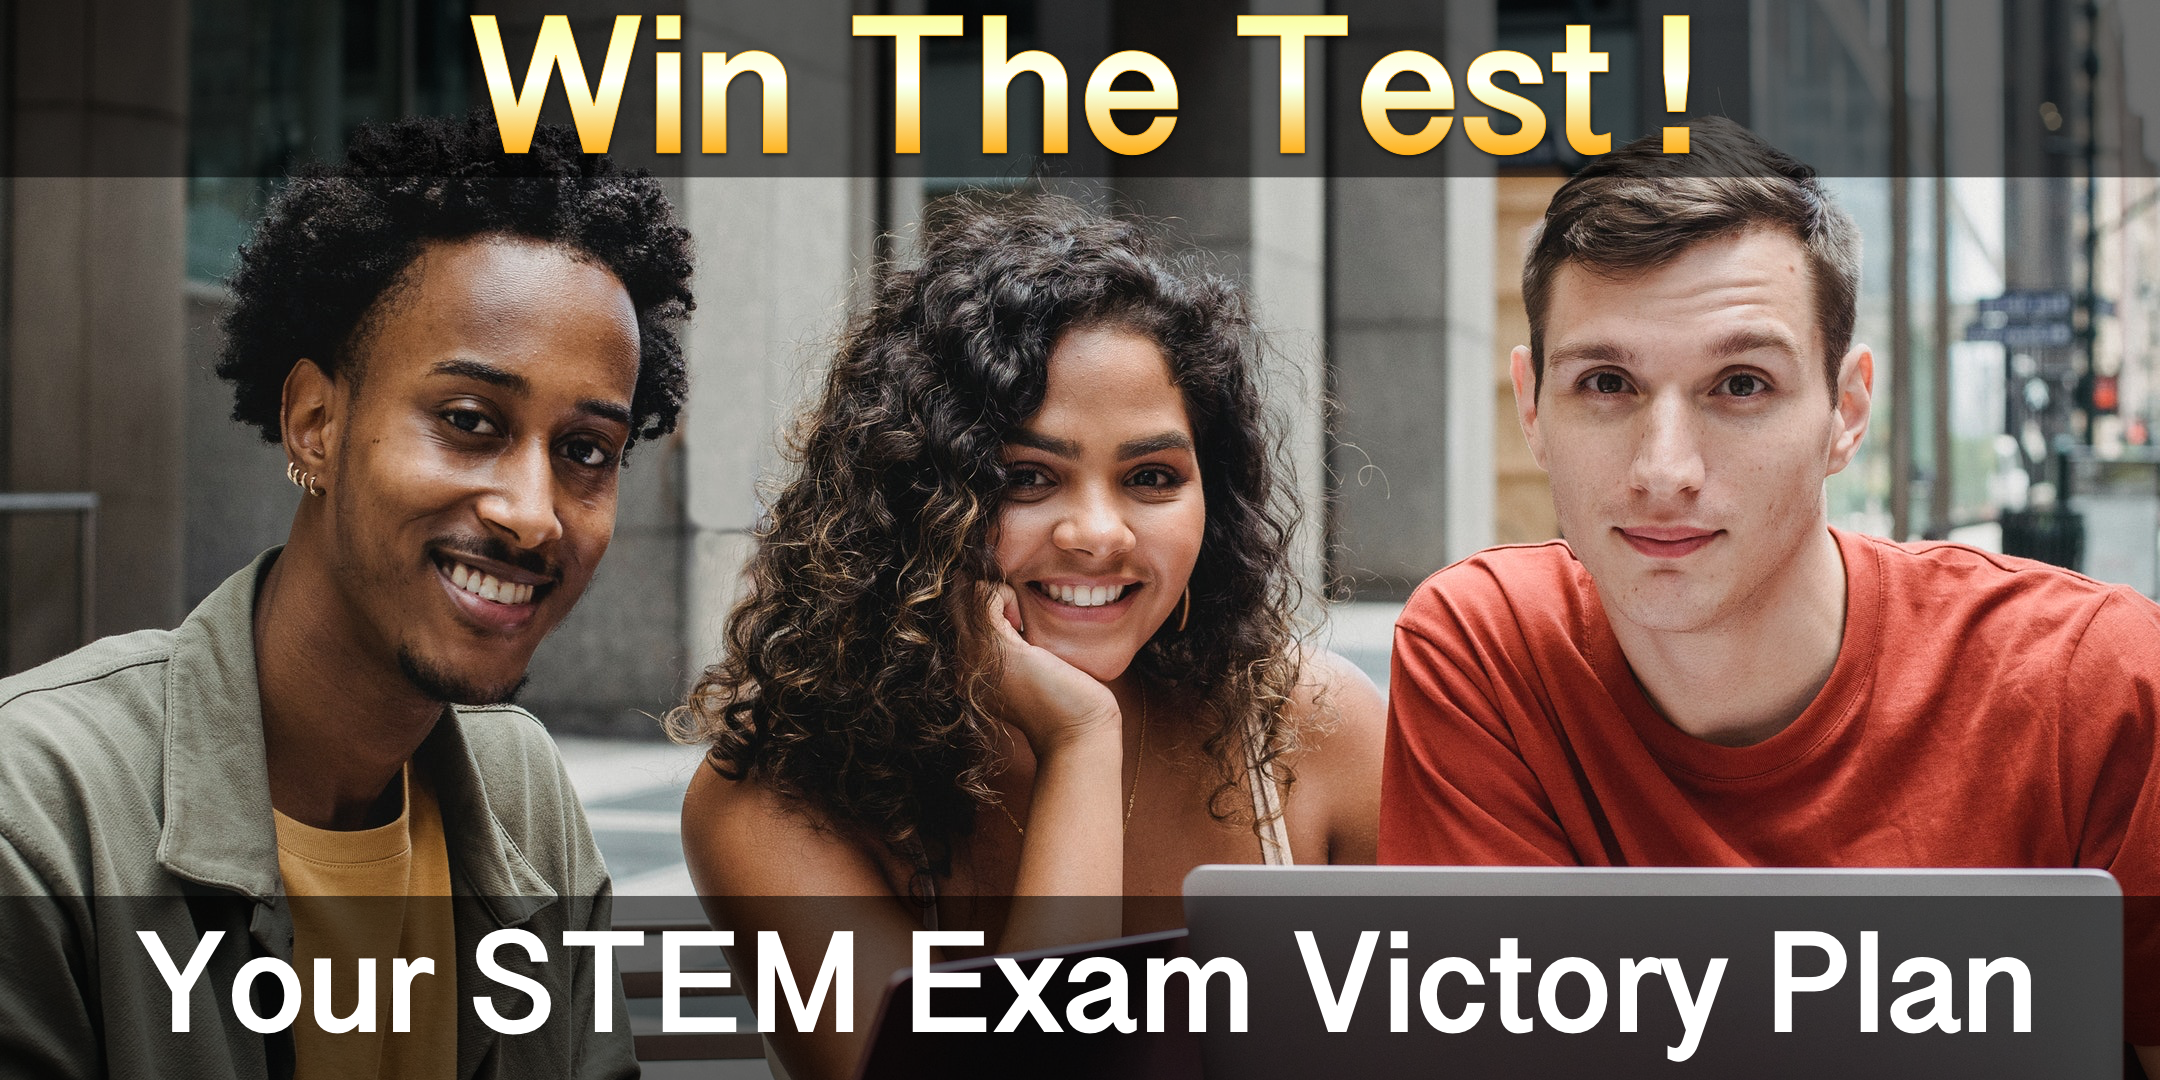 Win The Test